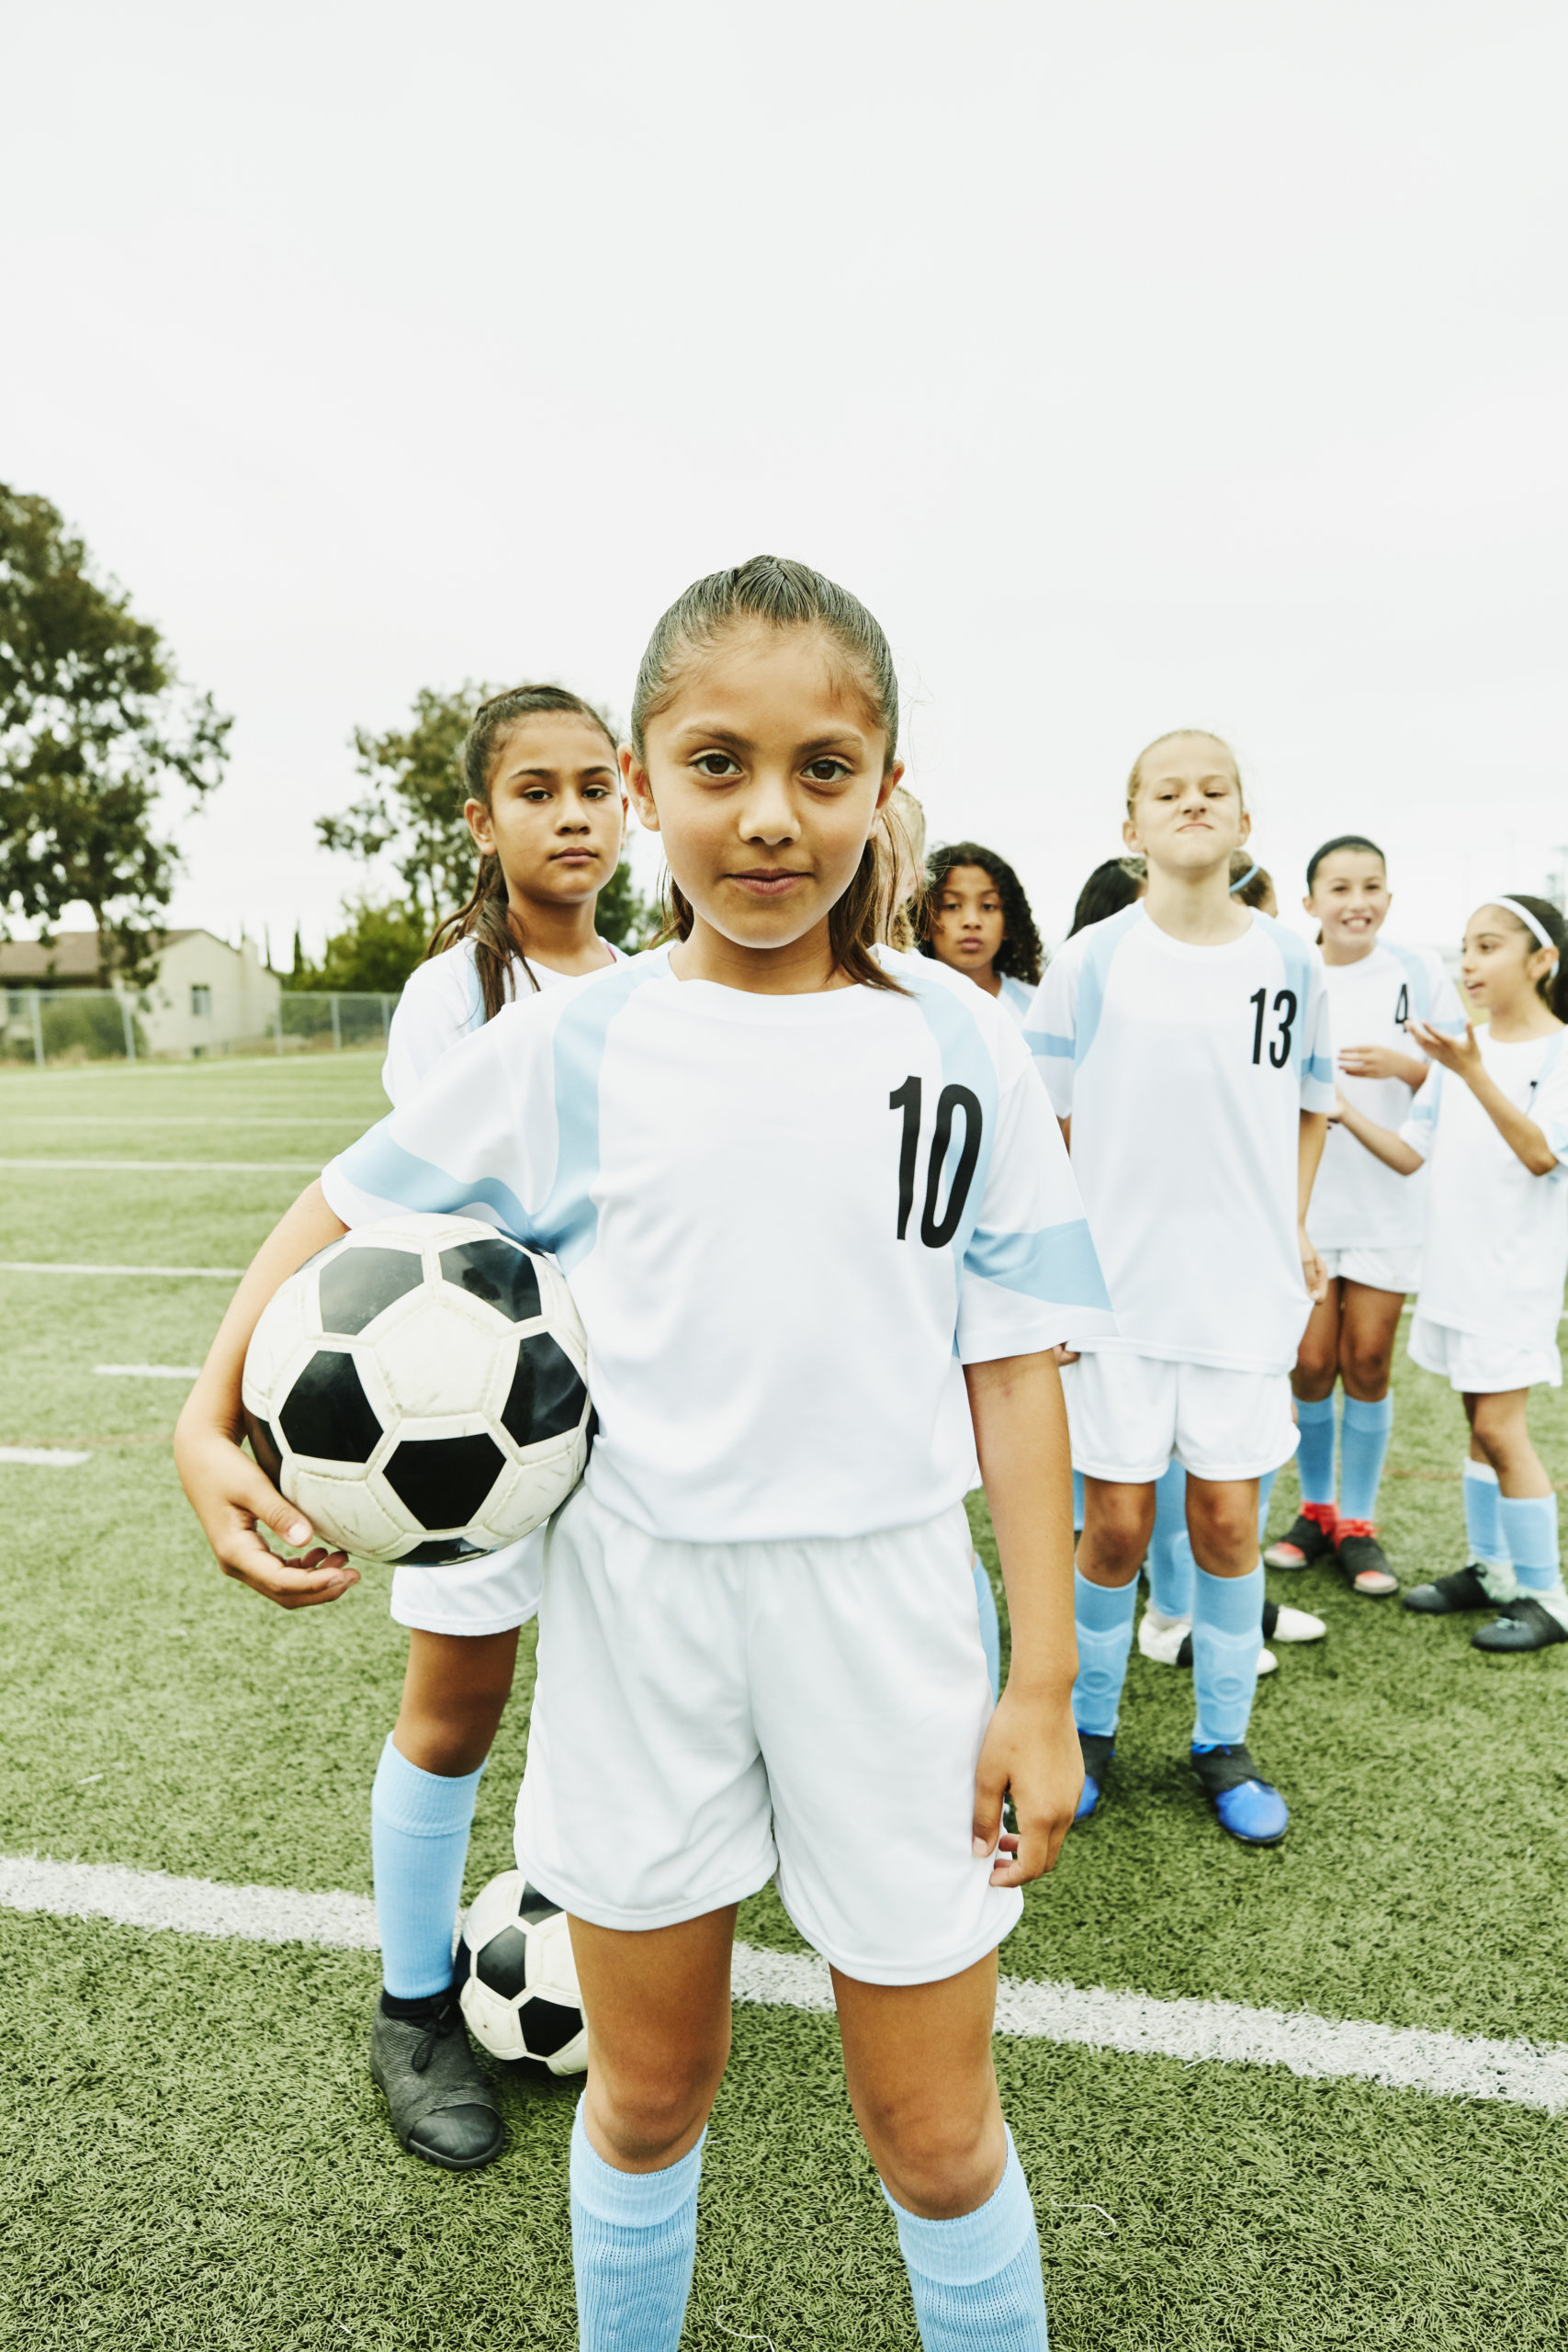 Portrait of young female soccer player holding ball and standing in front of teammates